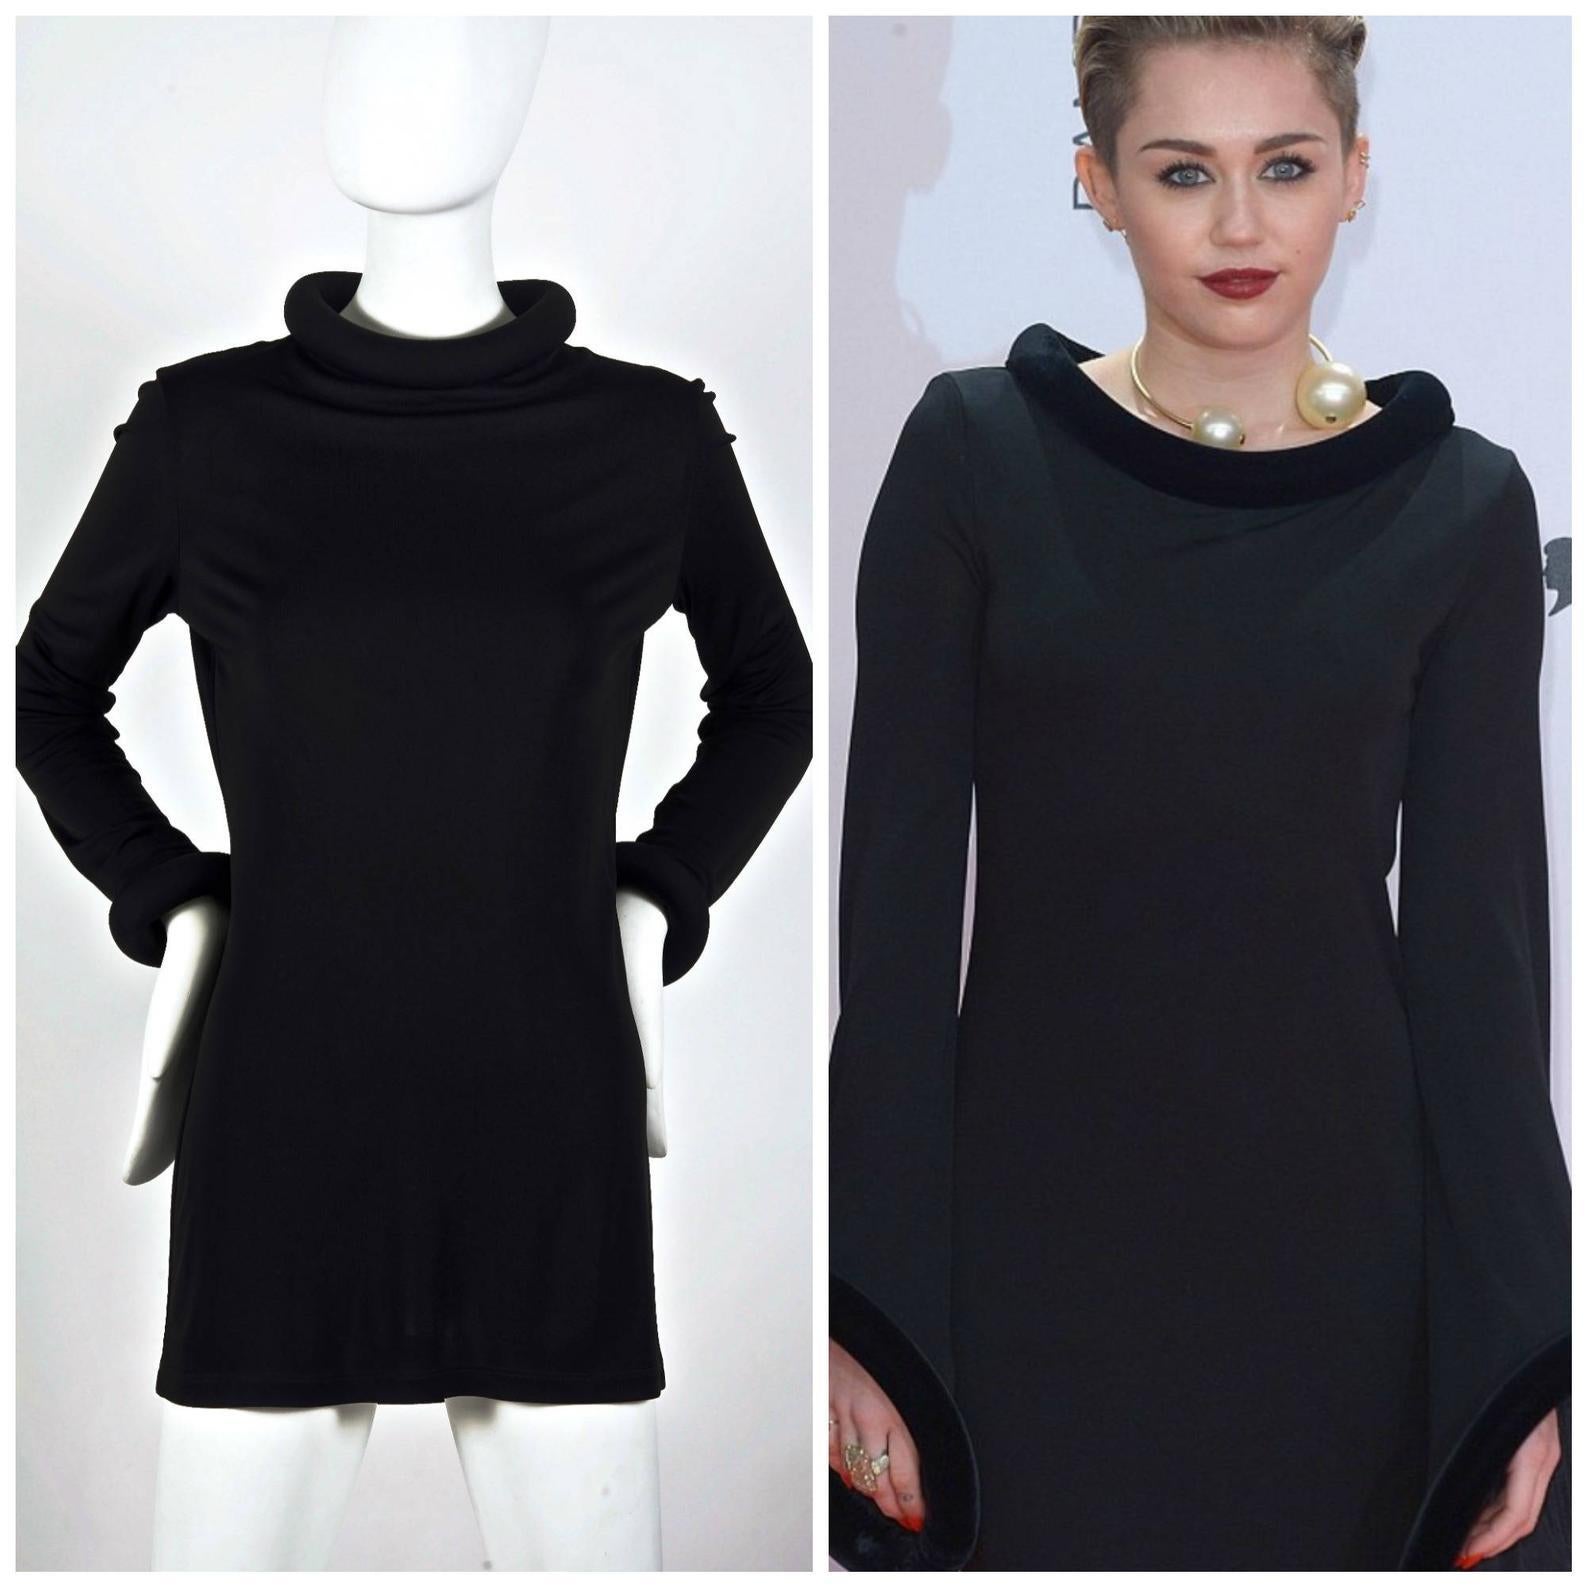 Vintage JEAN PAUL GAULTIER Tube Collar Cuff Black Dress

Measurements taken laid flat please double bust, waist and hips:
Shoulder: 16.53 inches (42 cm) without stretching
Sleeves: 27.95 inches (71 cm)
Bust: 15.74 inches (40 cm) without